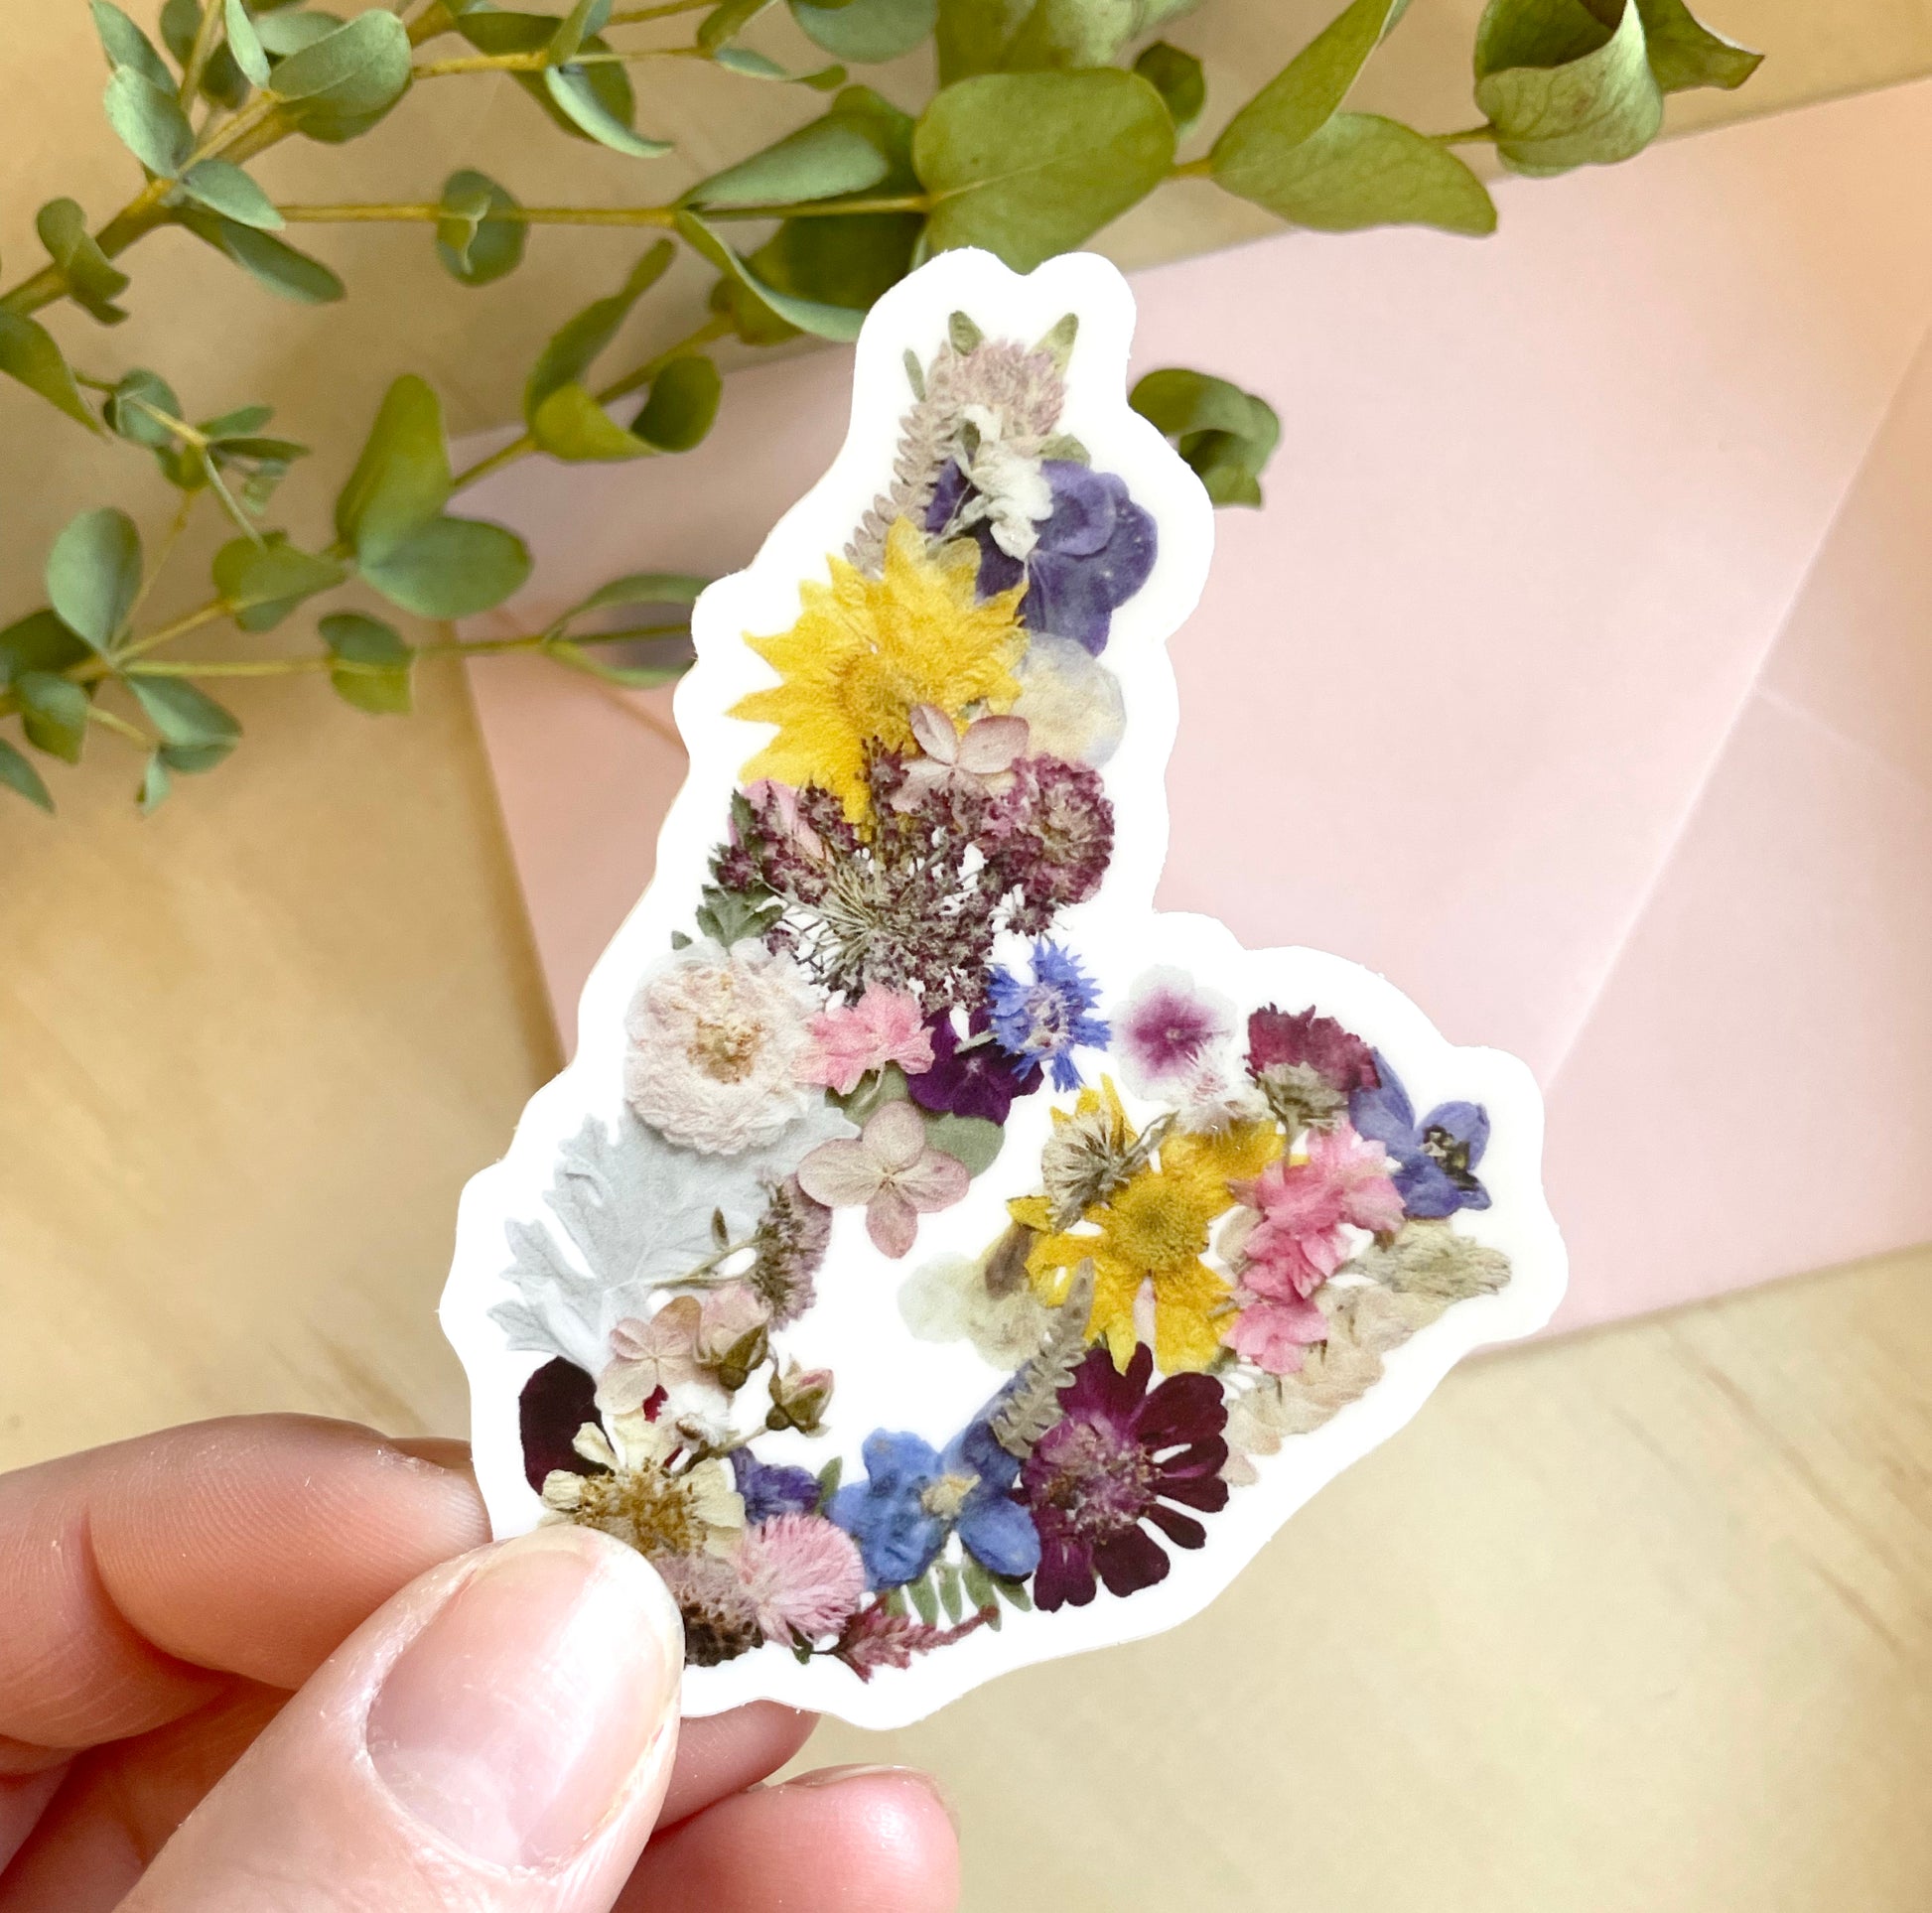 sticker of cape breton map made with dried pressed flowers grown in nova scotia and creatively arranged to look like cape breton island. 